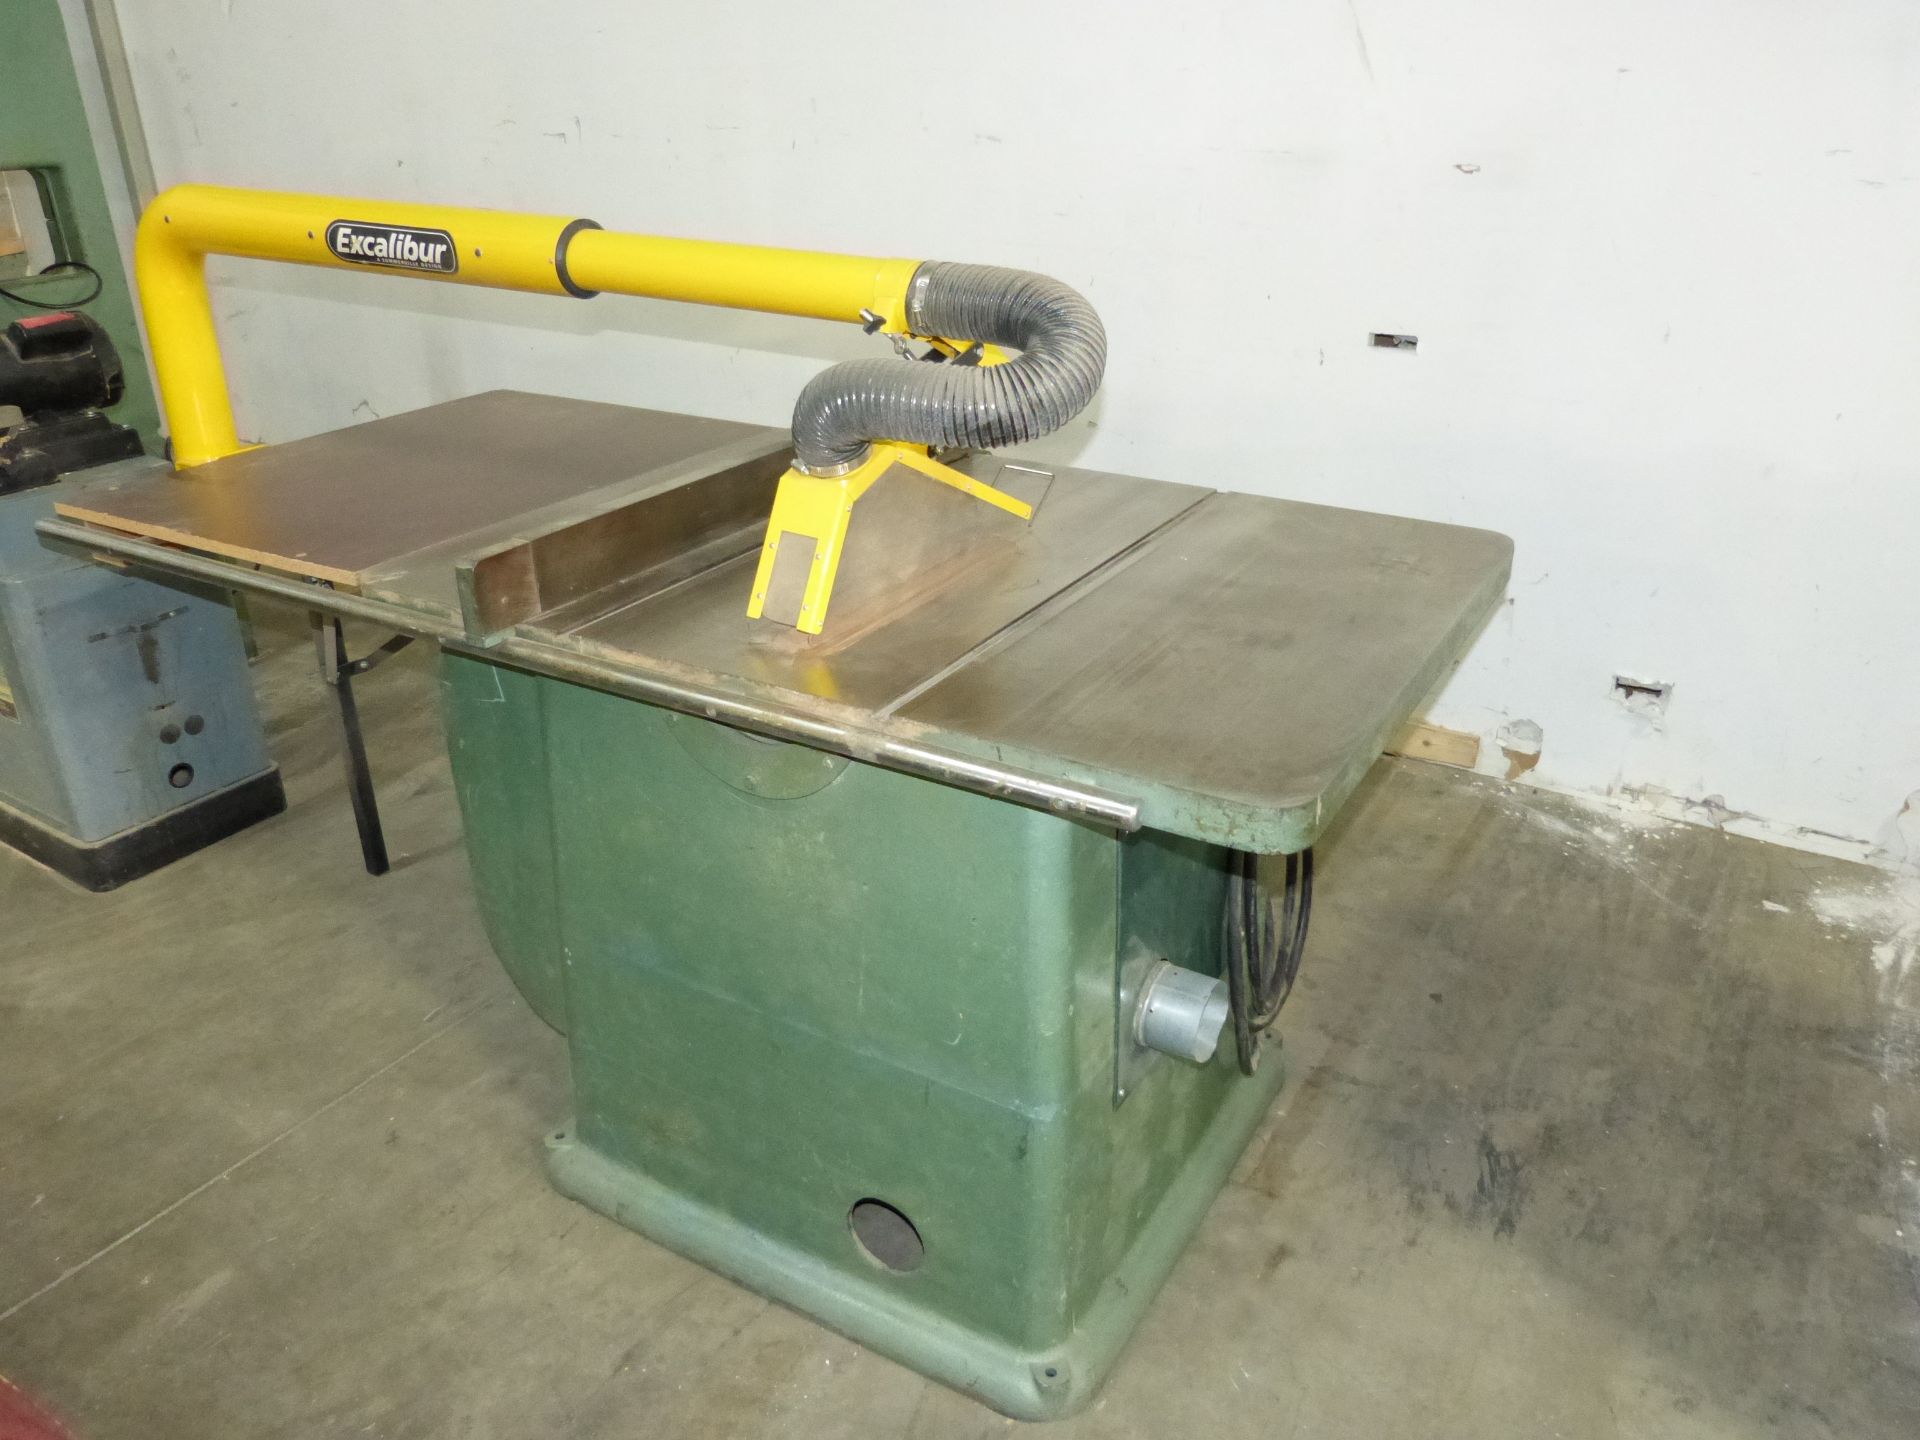 GENERAL 10" TABLE SAW, 24" GAUGING SYSTEM, TILTING BLADE, WITH EXCALIBUR DUST COLLECTOR ARM ONLY - Image 3 of 5